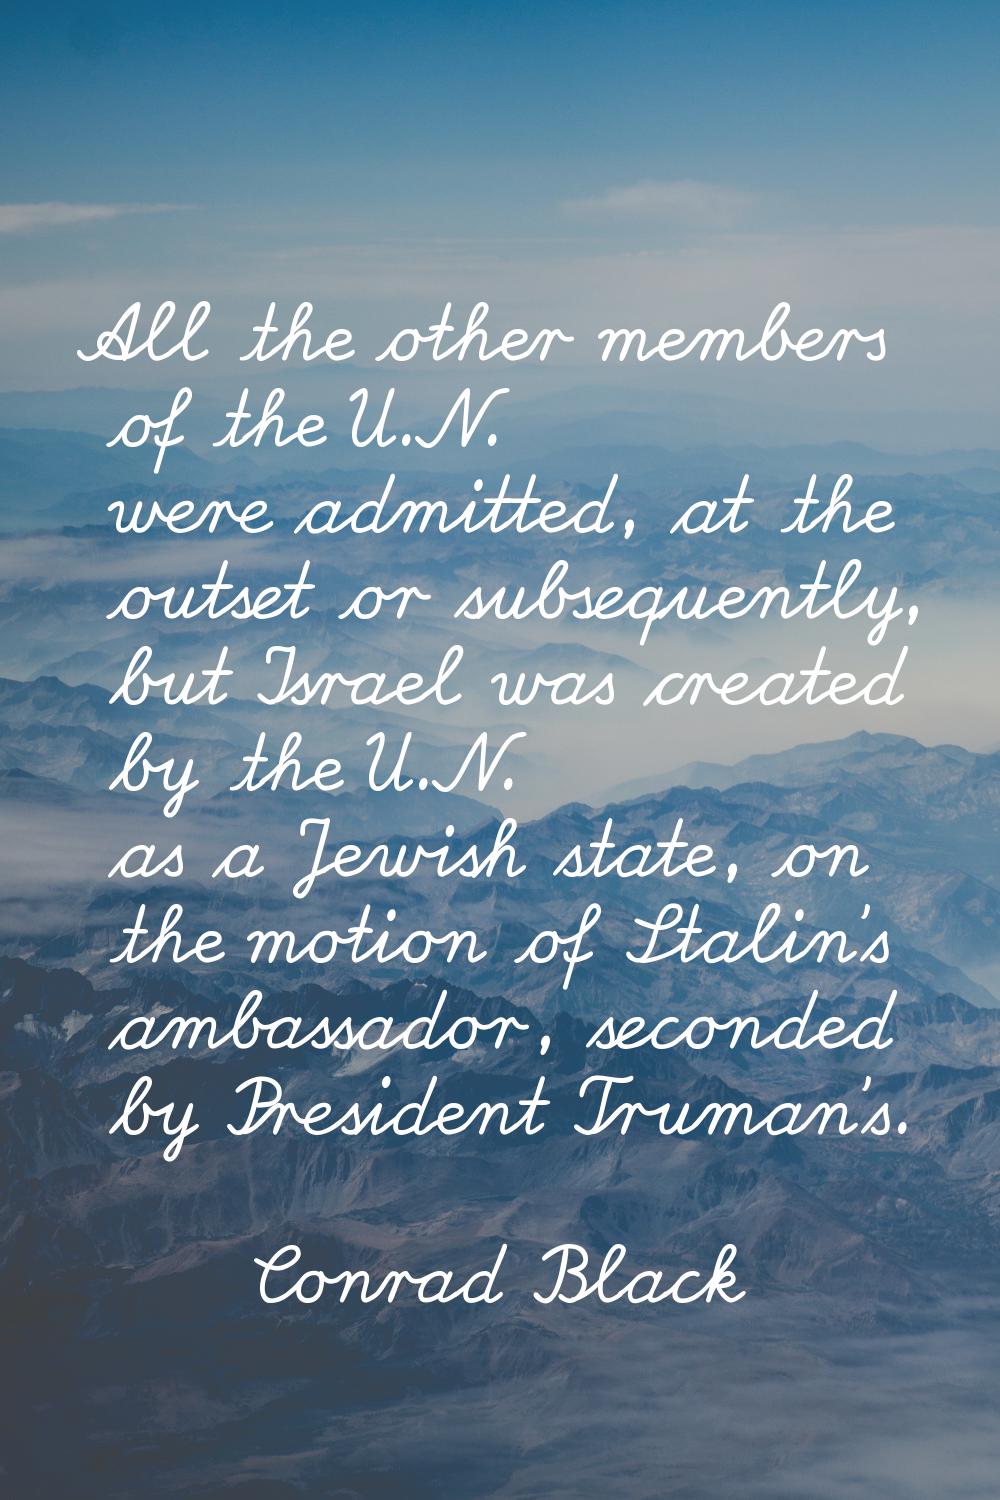 All the other members of the U.N. were admitted, at the outset or subsequently, but Israel was crea